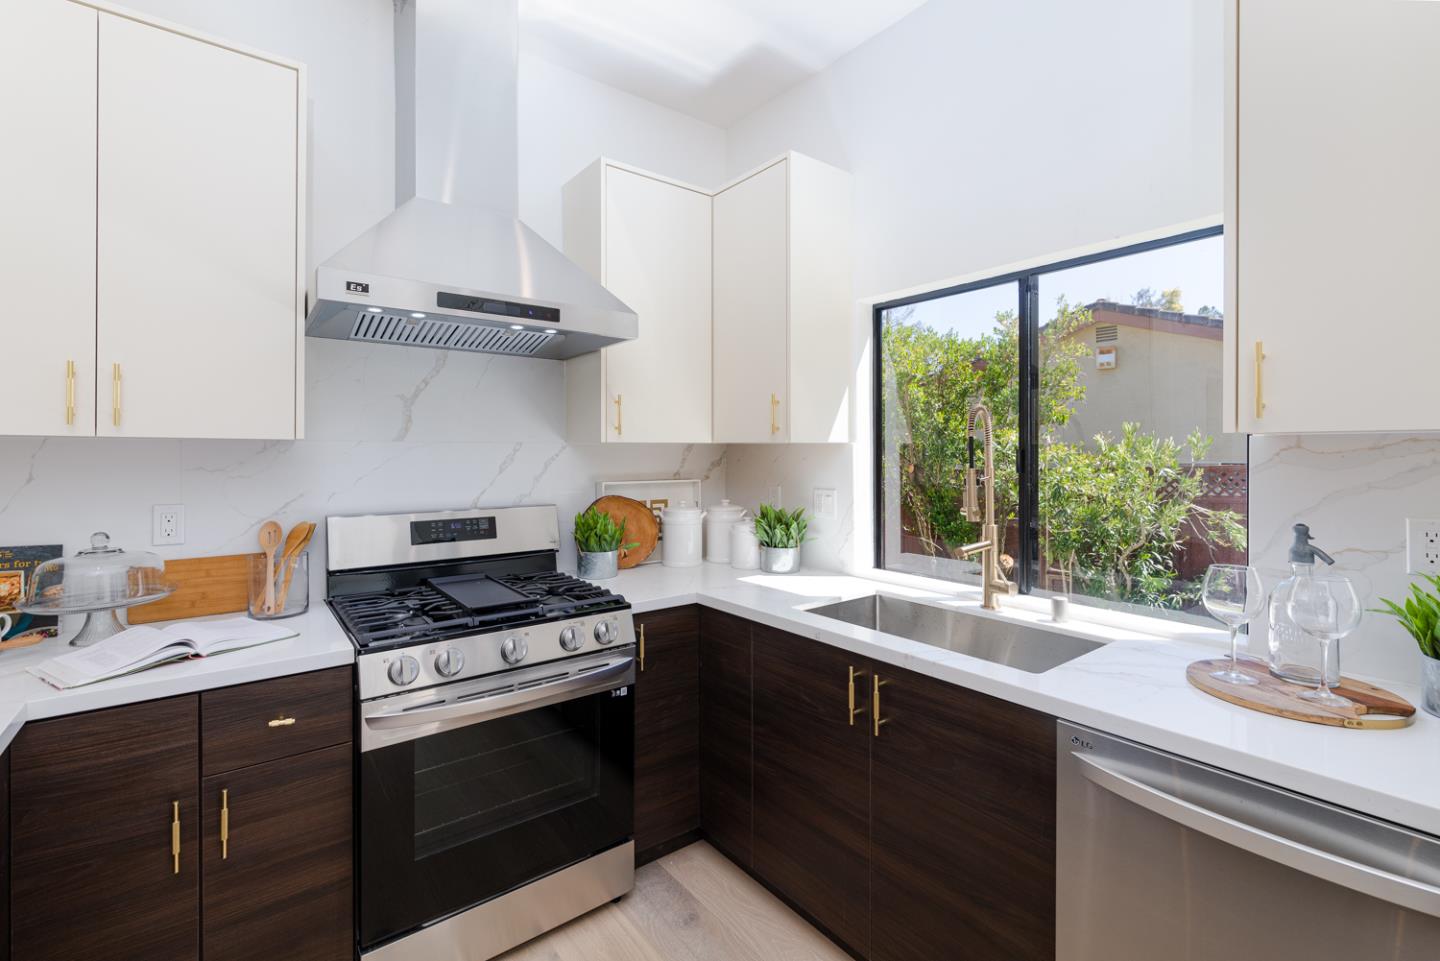 a kitchen with stainless steel appliances a sink a stove and a window